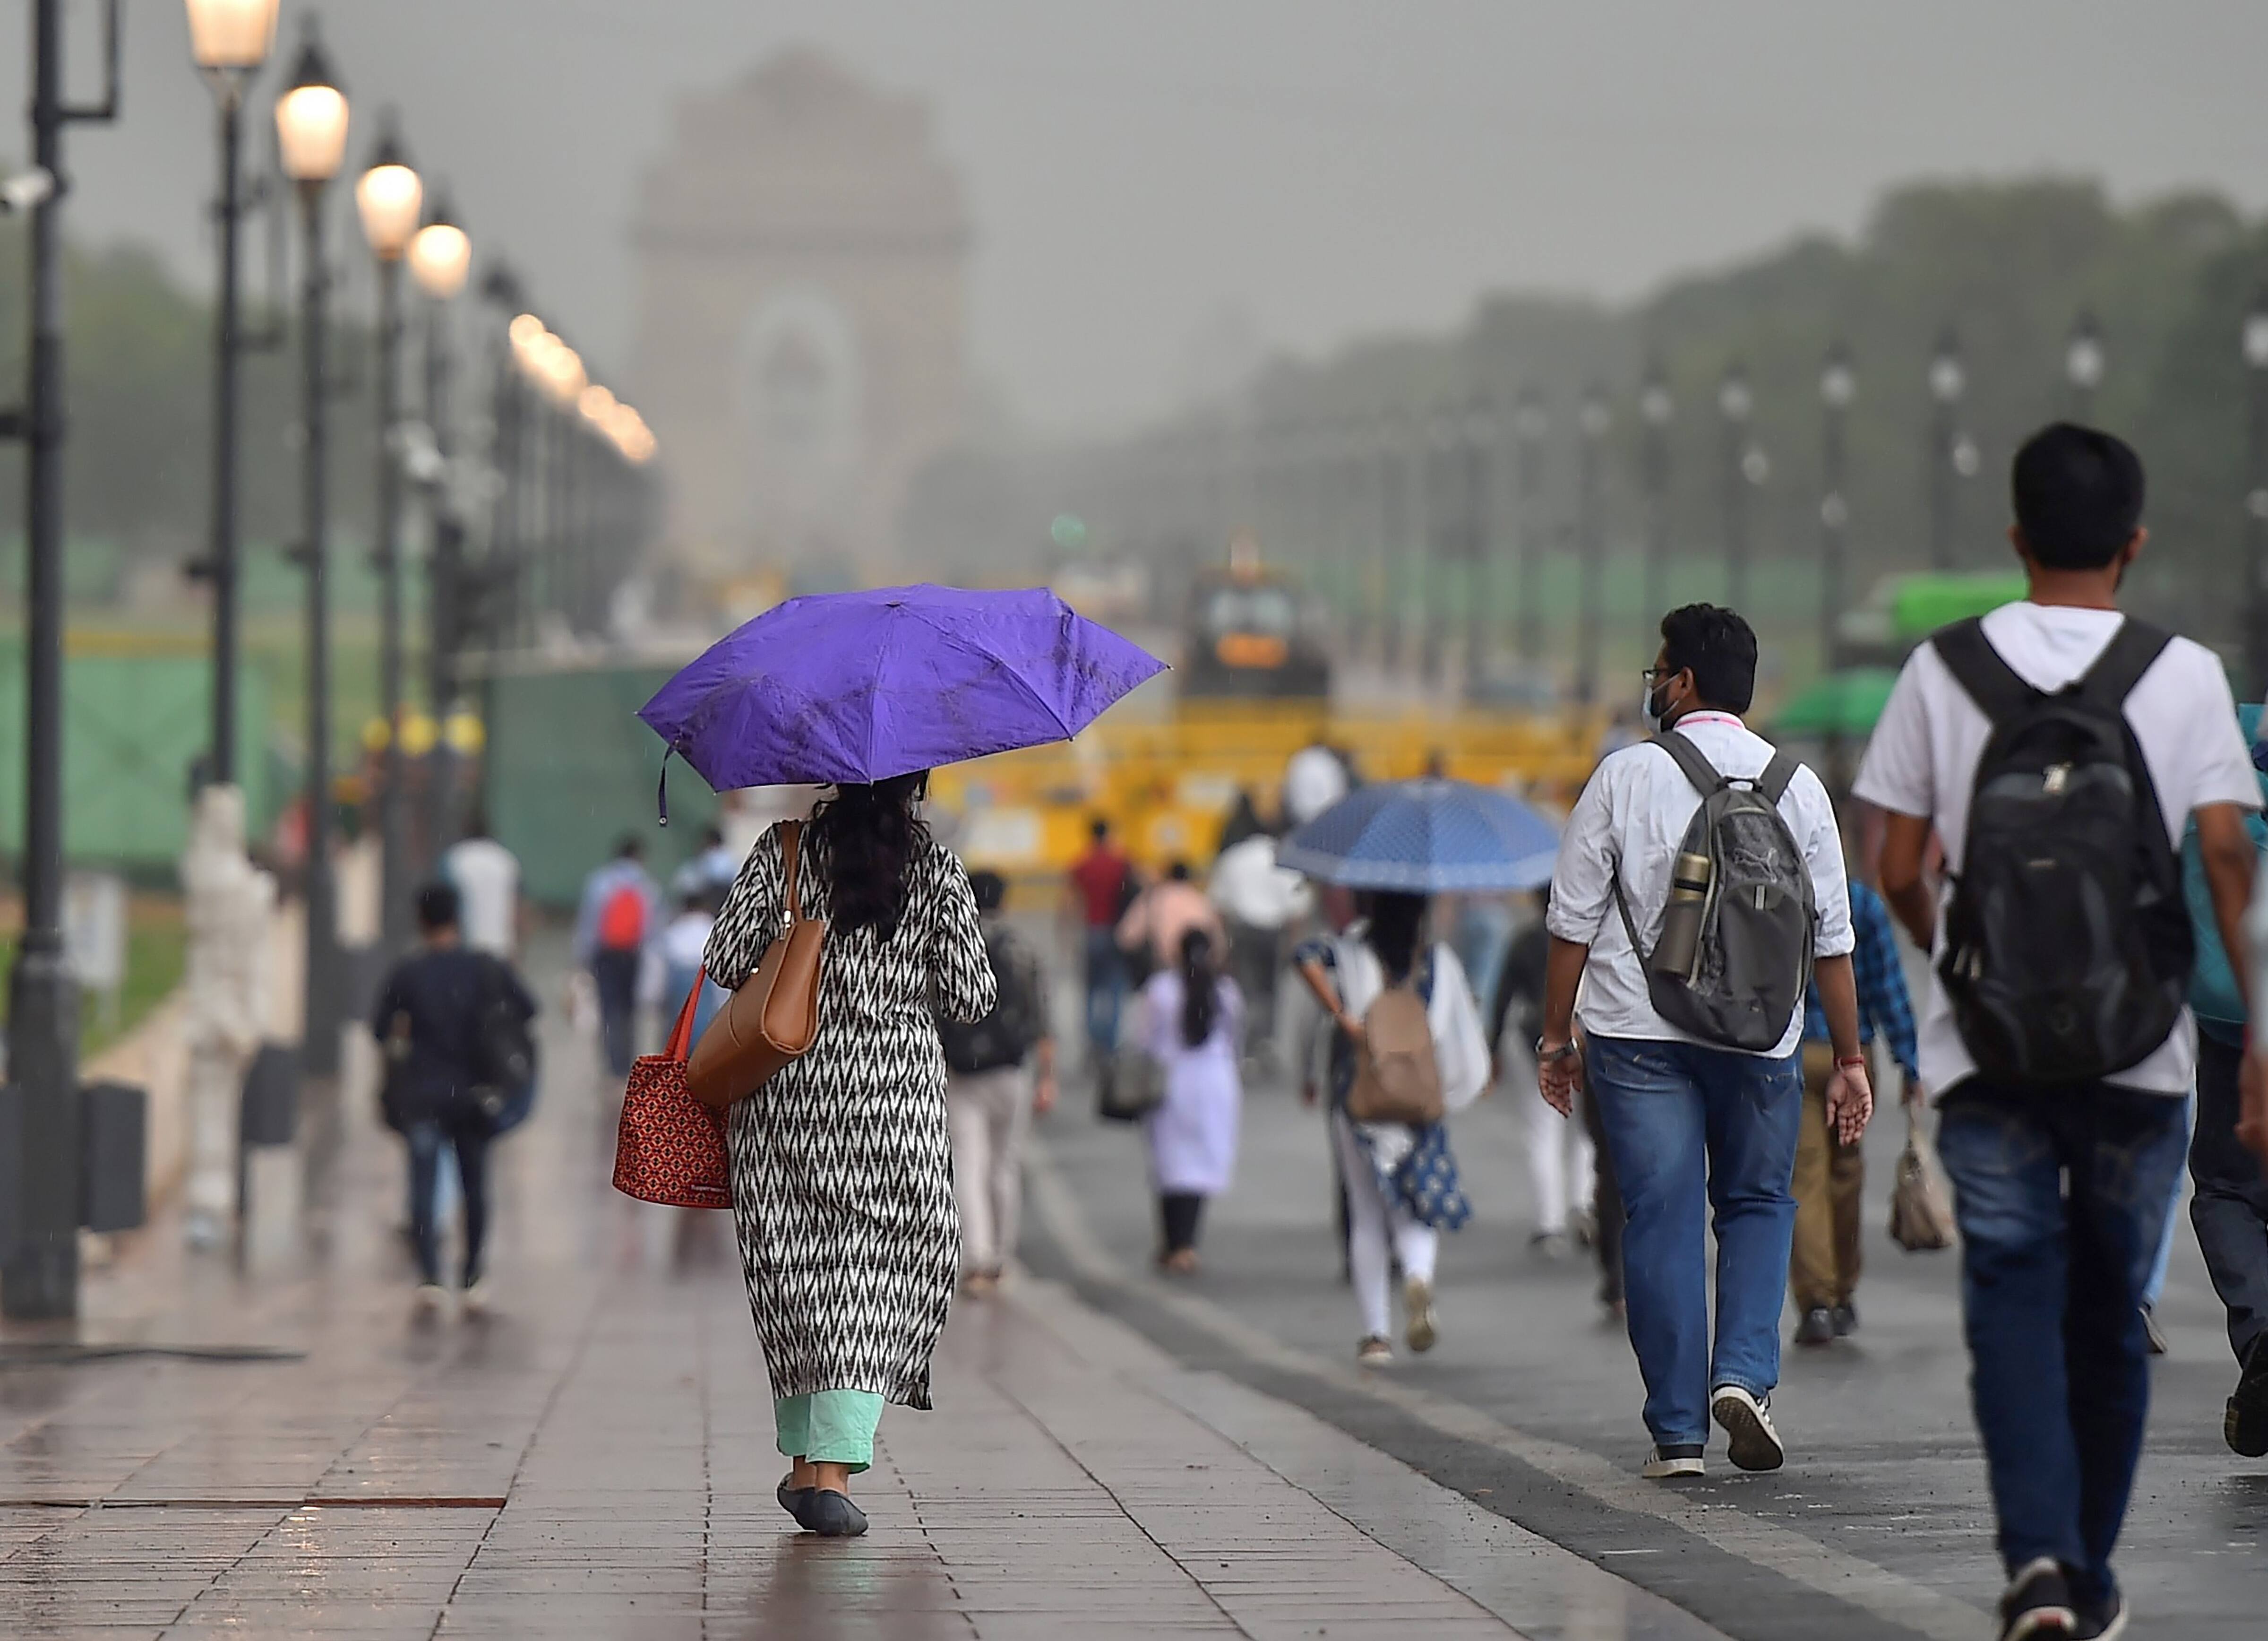 Delhi rains: National capital gets respite from heatwave with downpour